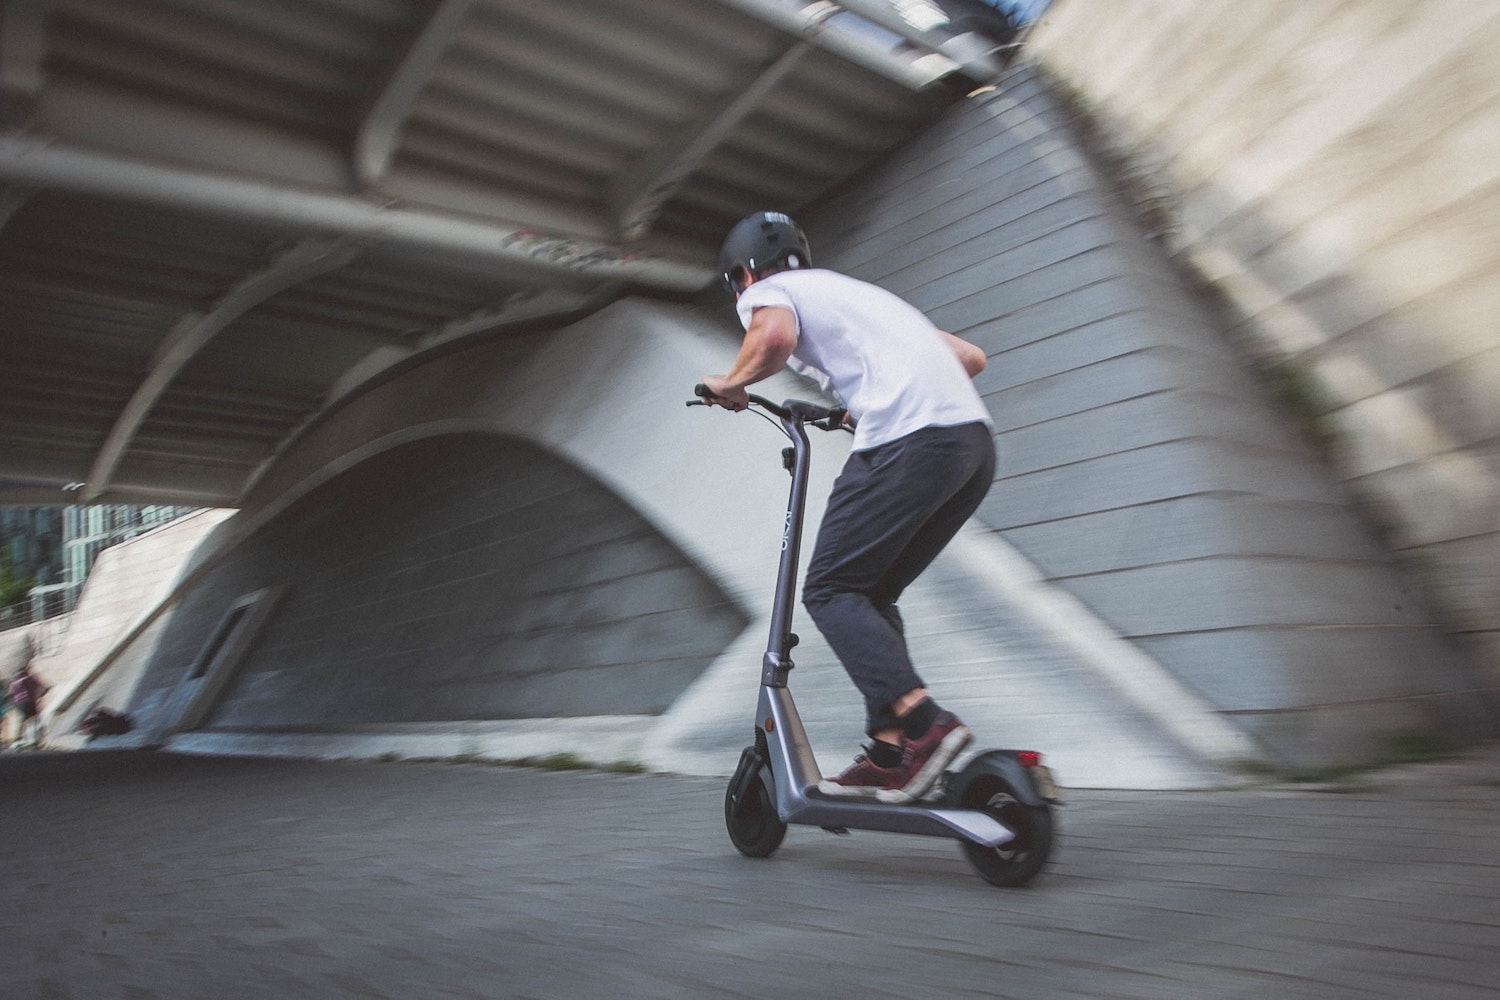 A man in a helmet races under a bridge on an electric kick scooter, a blurry stone wall visible in the background.